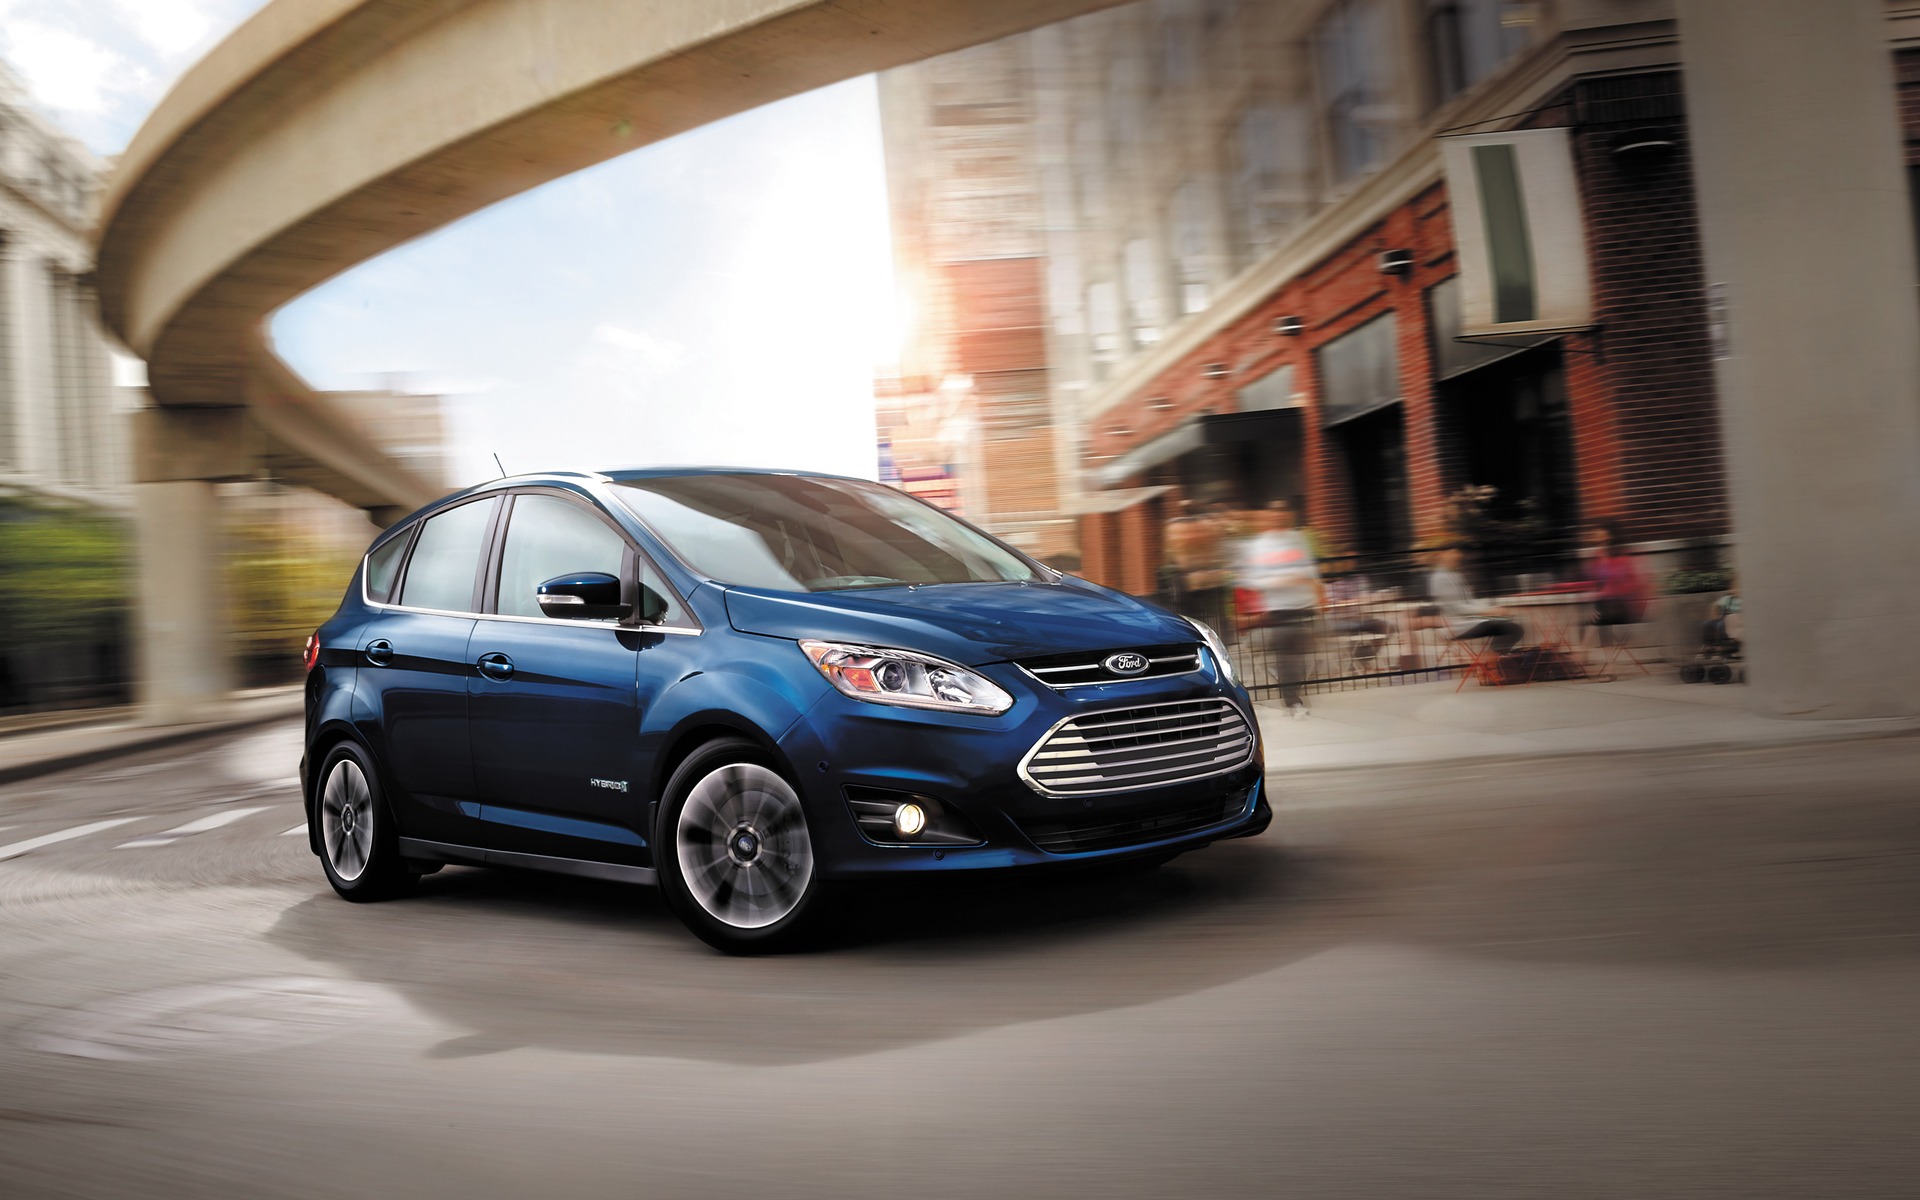 18 Ford C Max Se Specifications The Car Guide